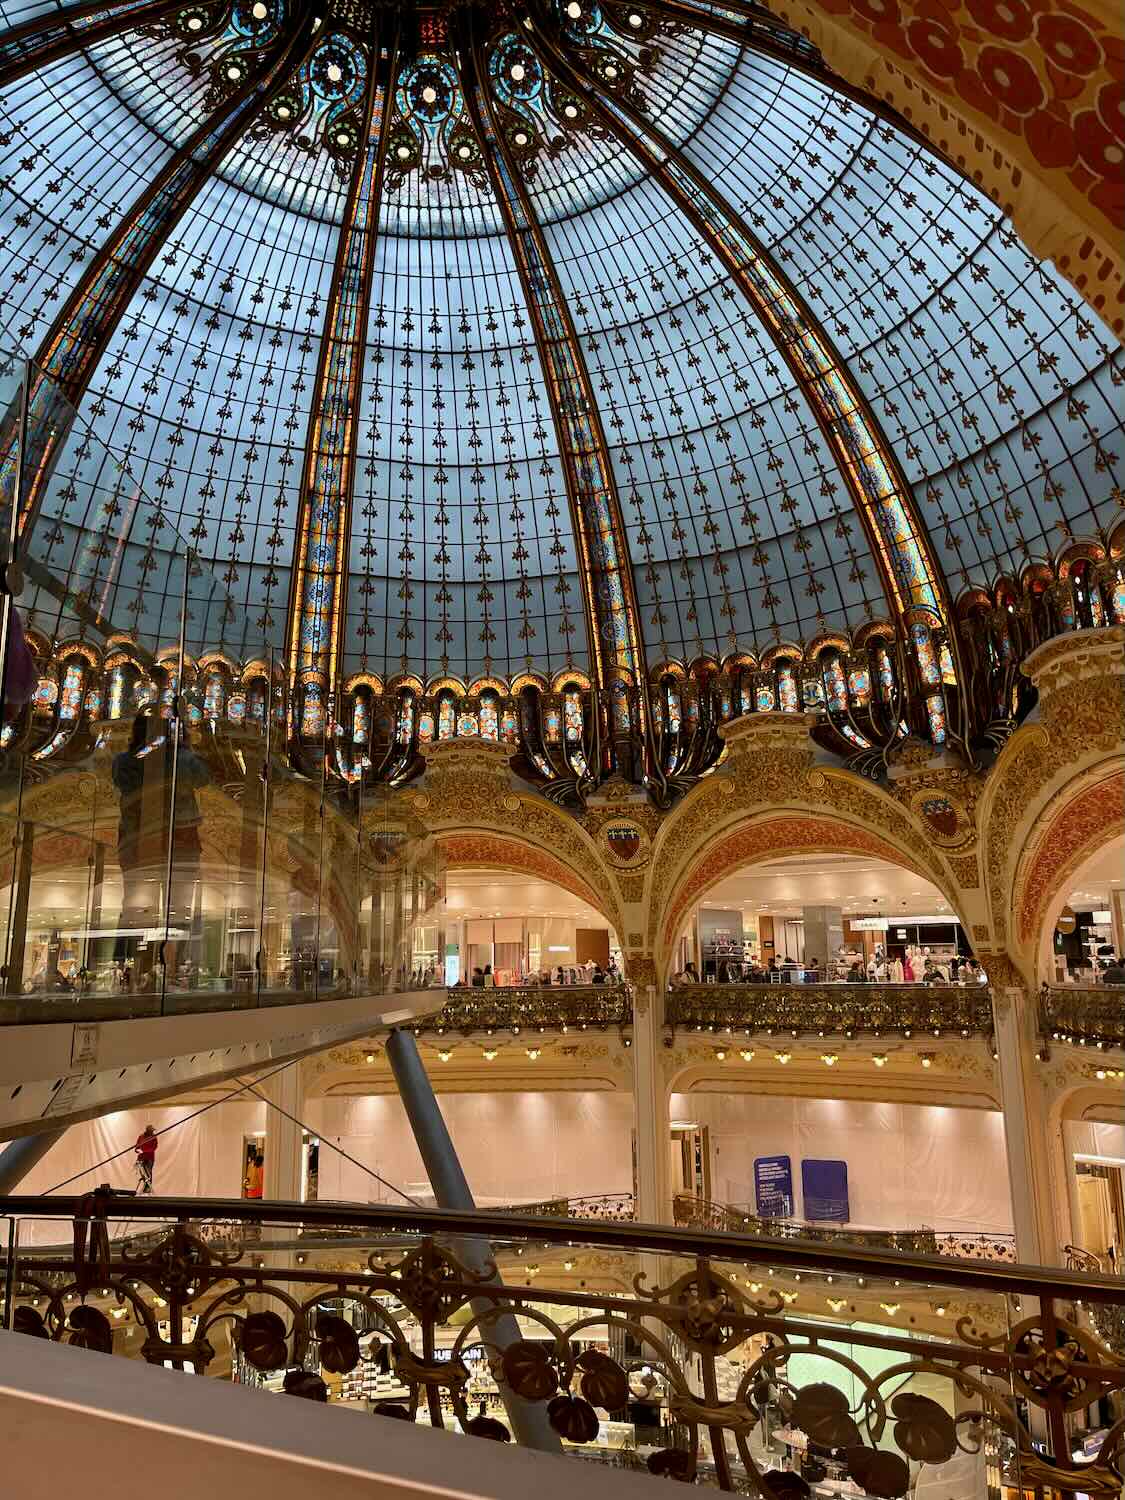 A breathtaking view inside Galeries Lafayette, showcasing its famed stained glass dome and opulent balconies. The golden decor and intricate details create a luxurious shopping environment, highlighted by the warm lighting and the bustling activity below.